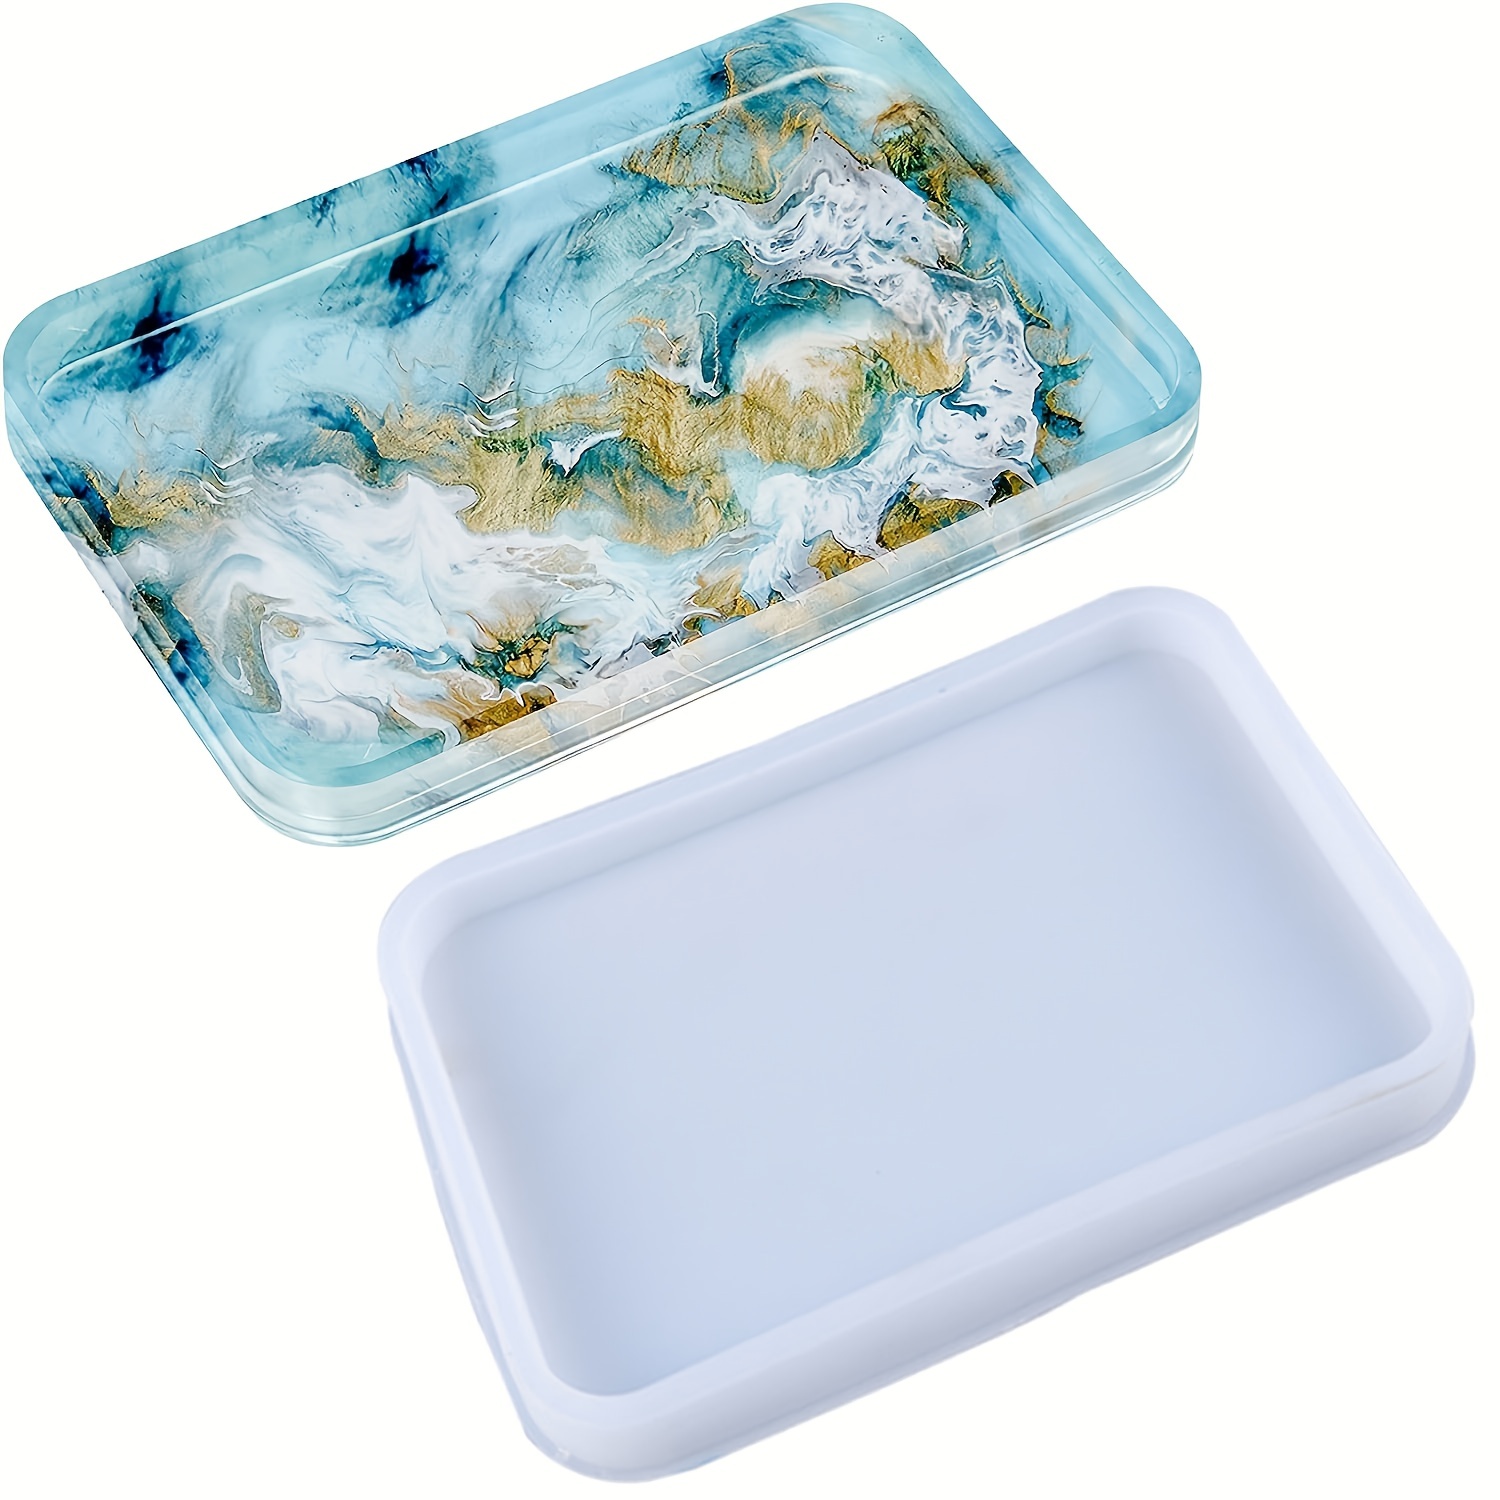 Rectangle Rolling Tray Resin Mold, Silicone Tray Mold With Edges, DIY Epoxy  Resin Large Serving Tray, for Fruit Snack Cosmetic Storage Decor 